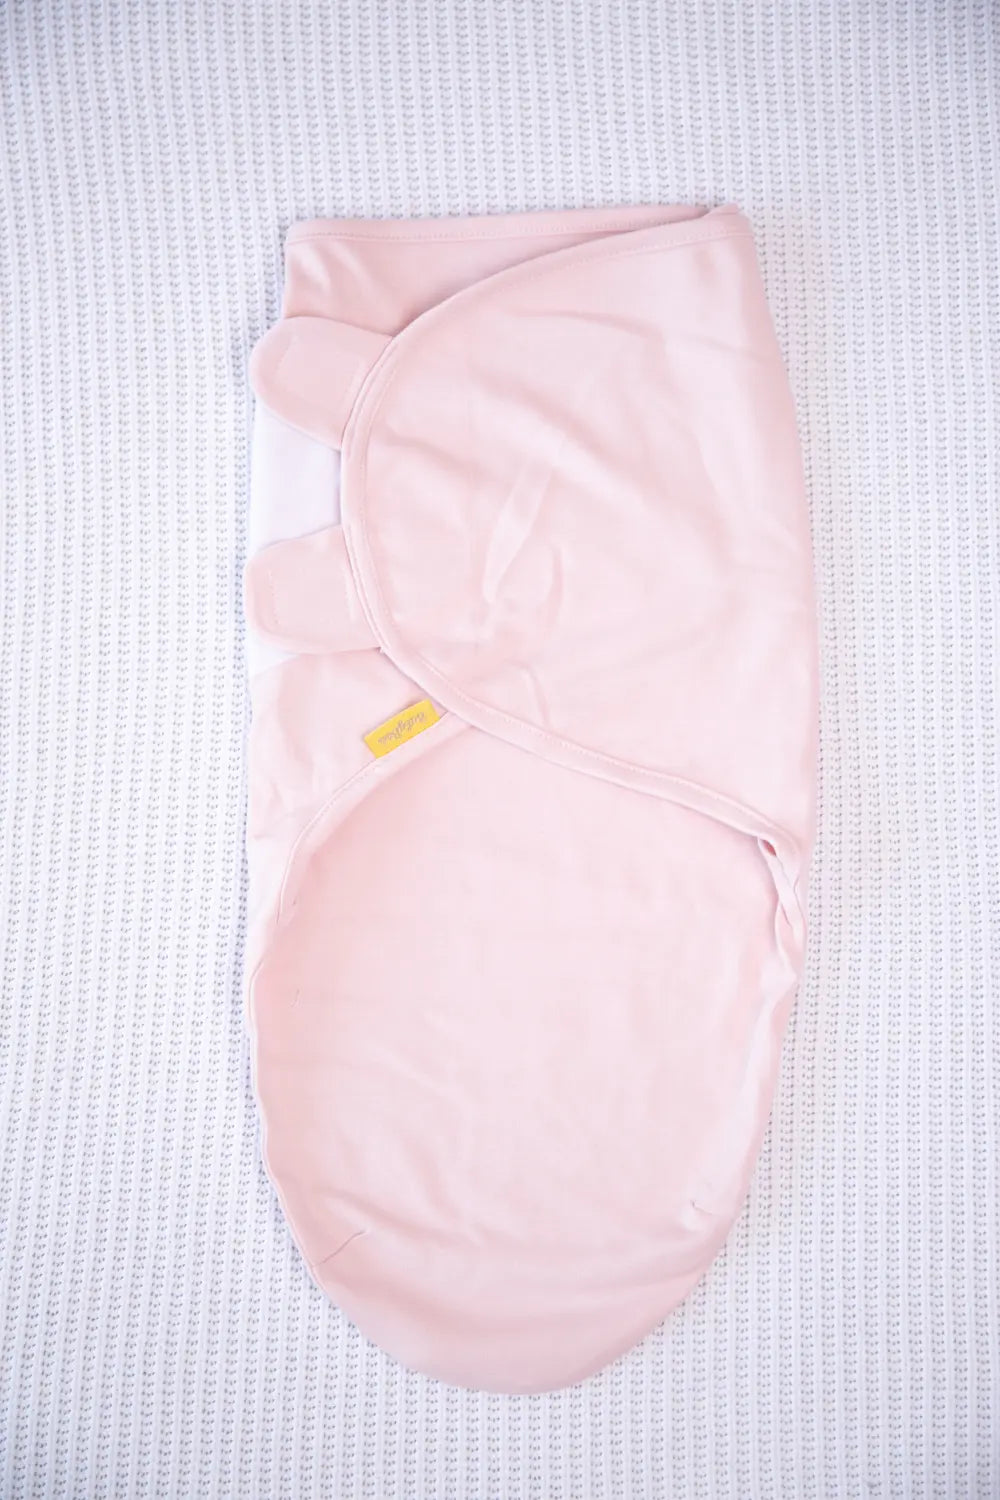 Babyboo Prewrapped Swaddle - Pink 1 Shaws Department Stores